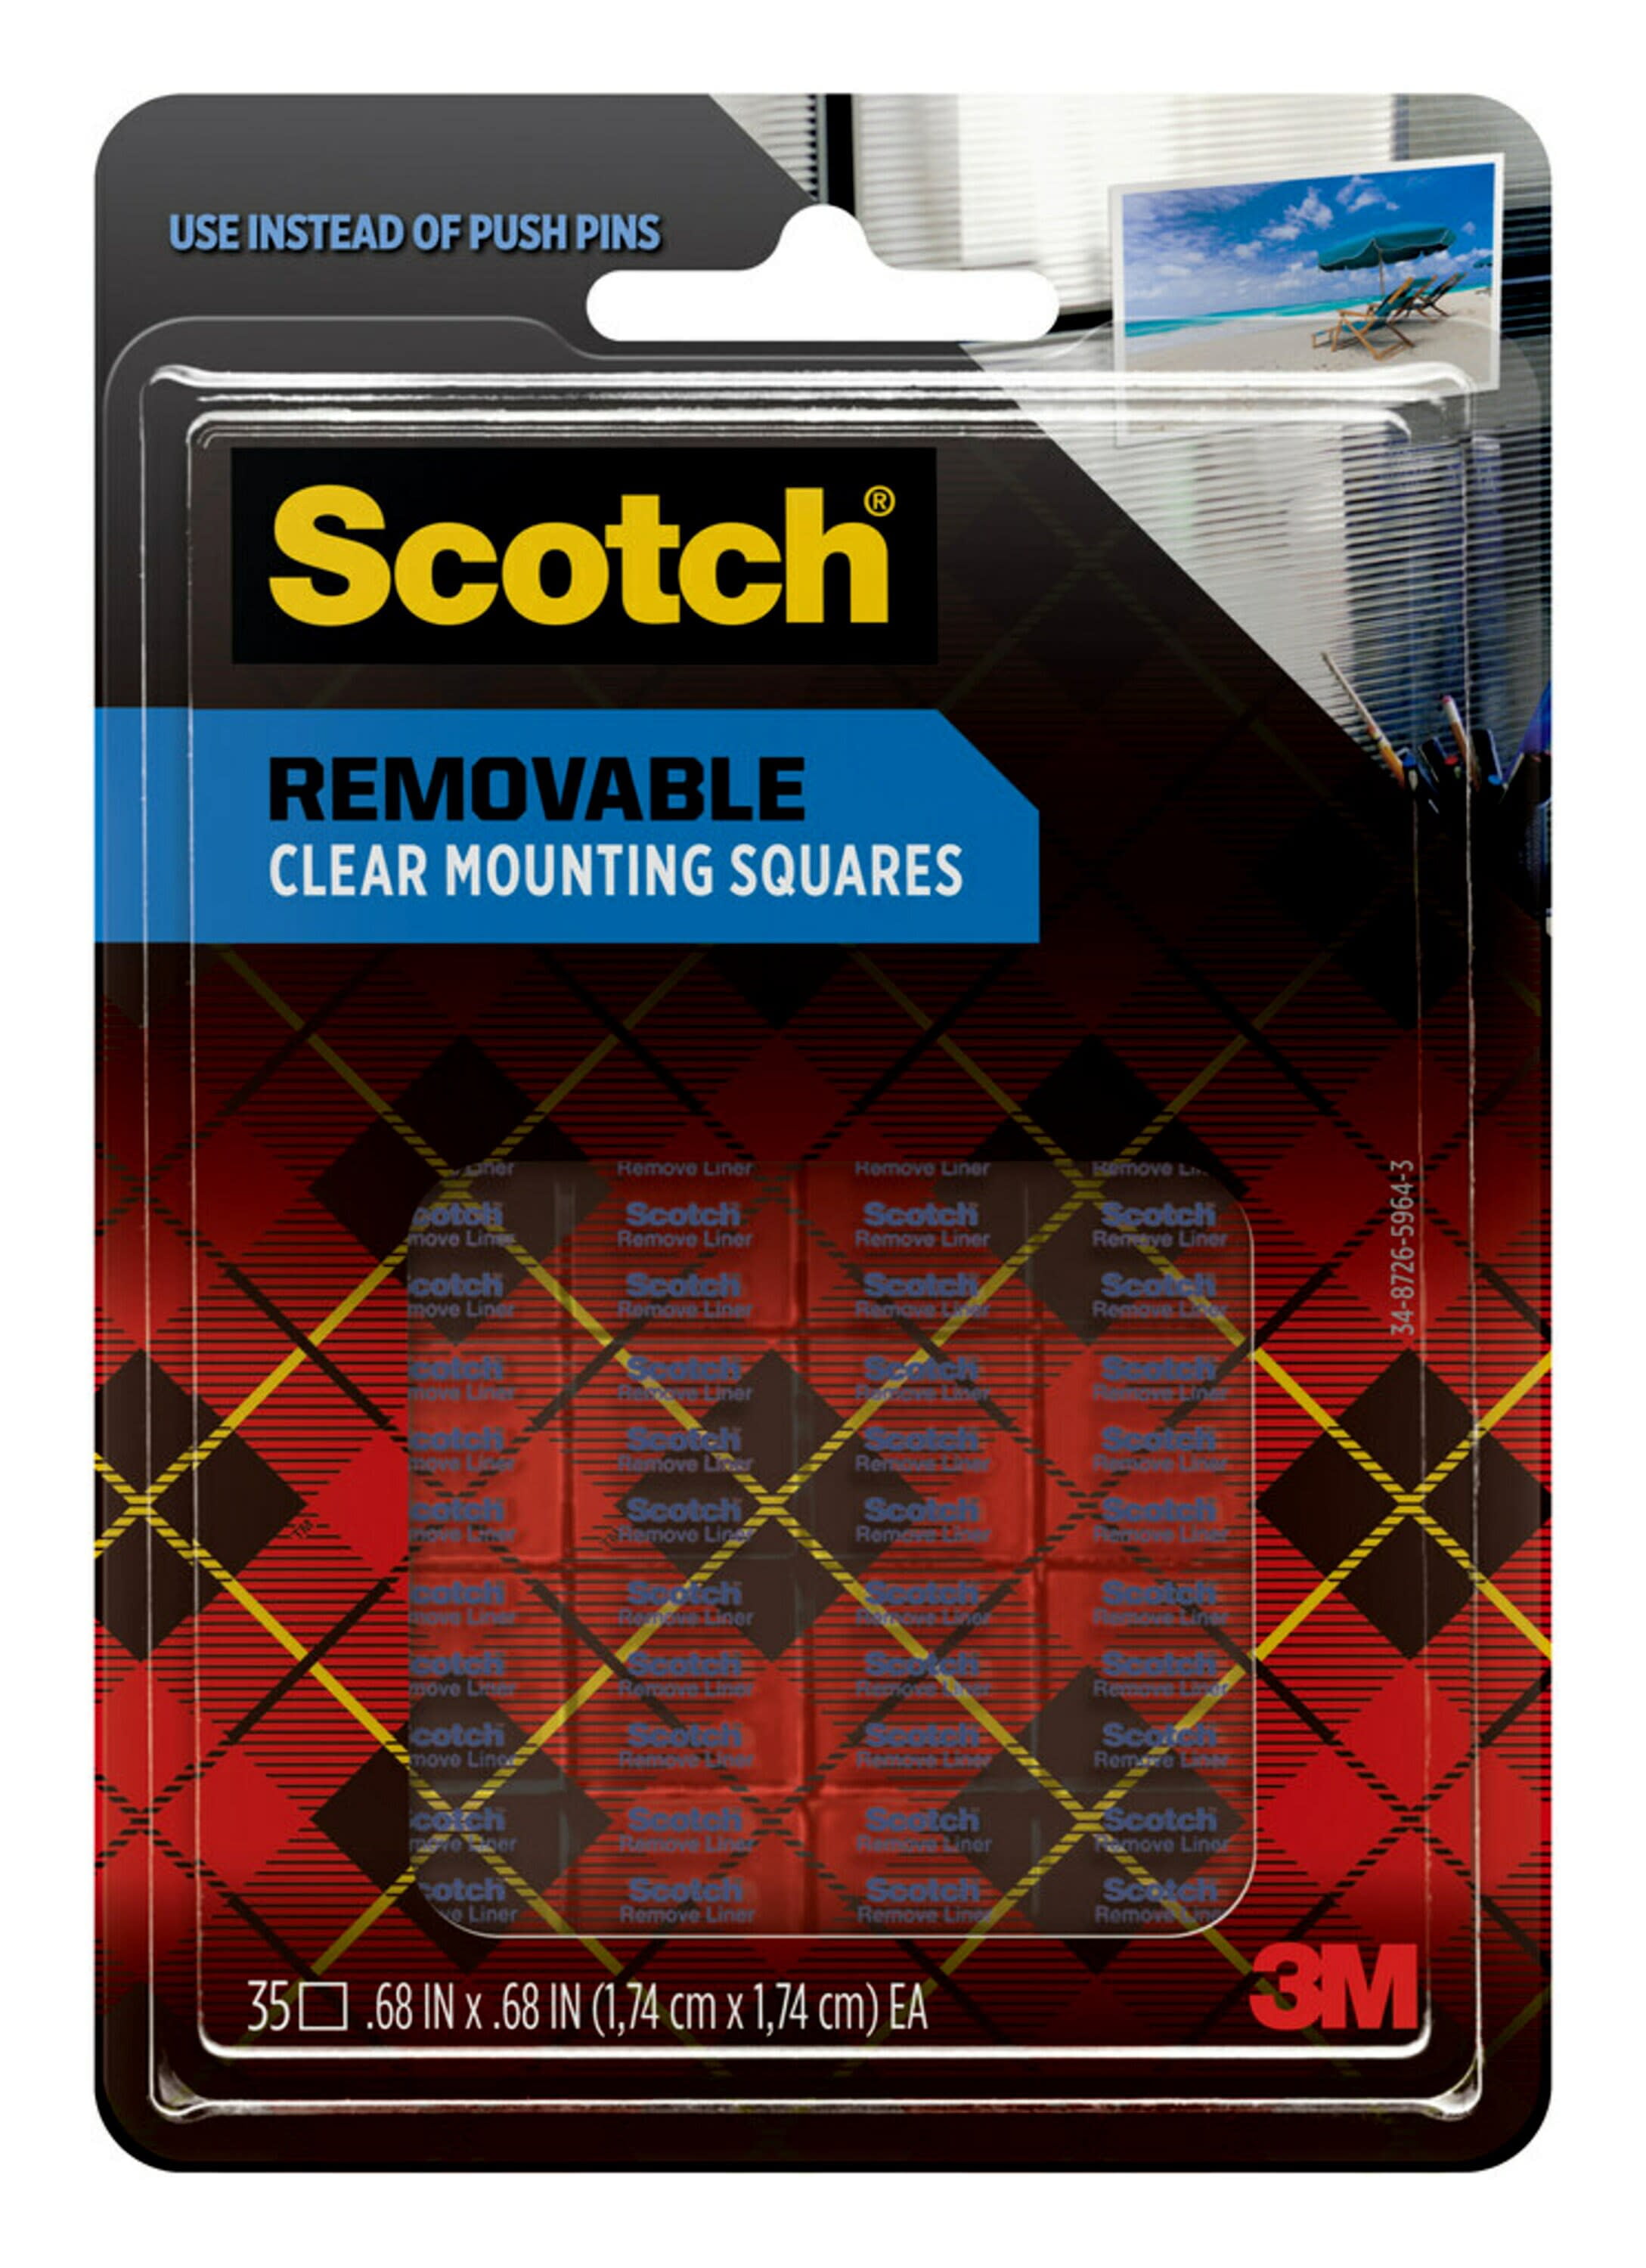 3M Scotch Double-Sided Mounting Squares Unboxing 